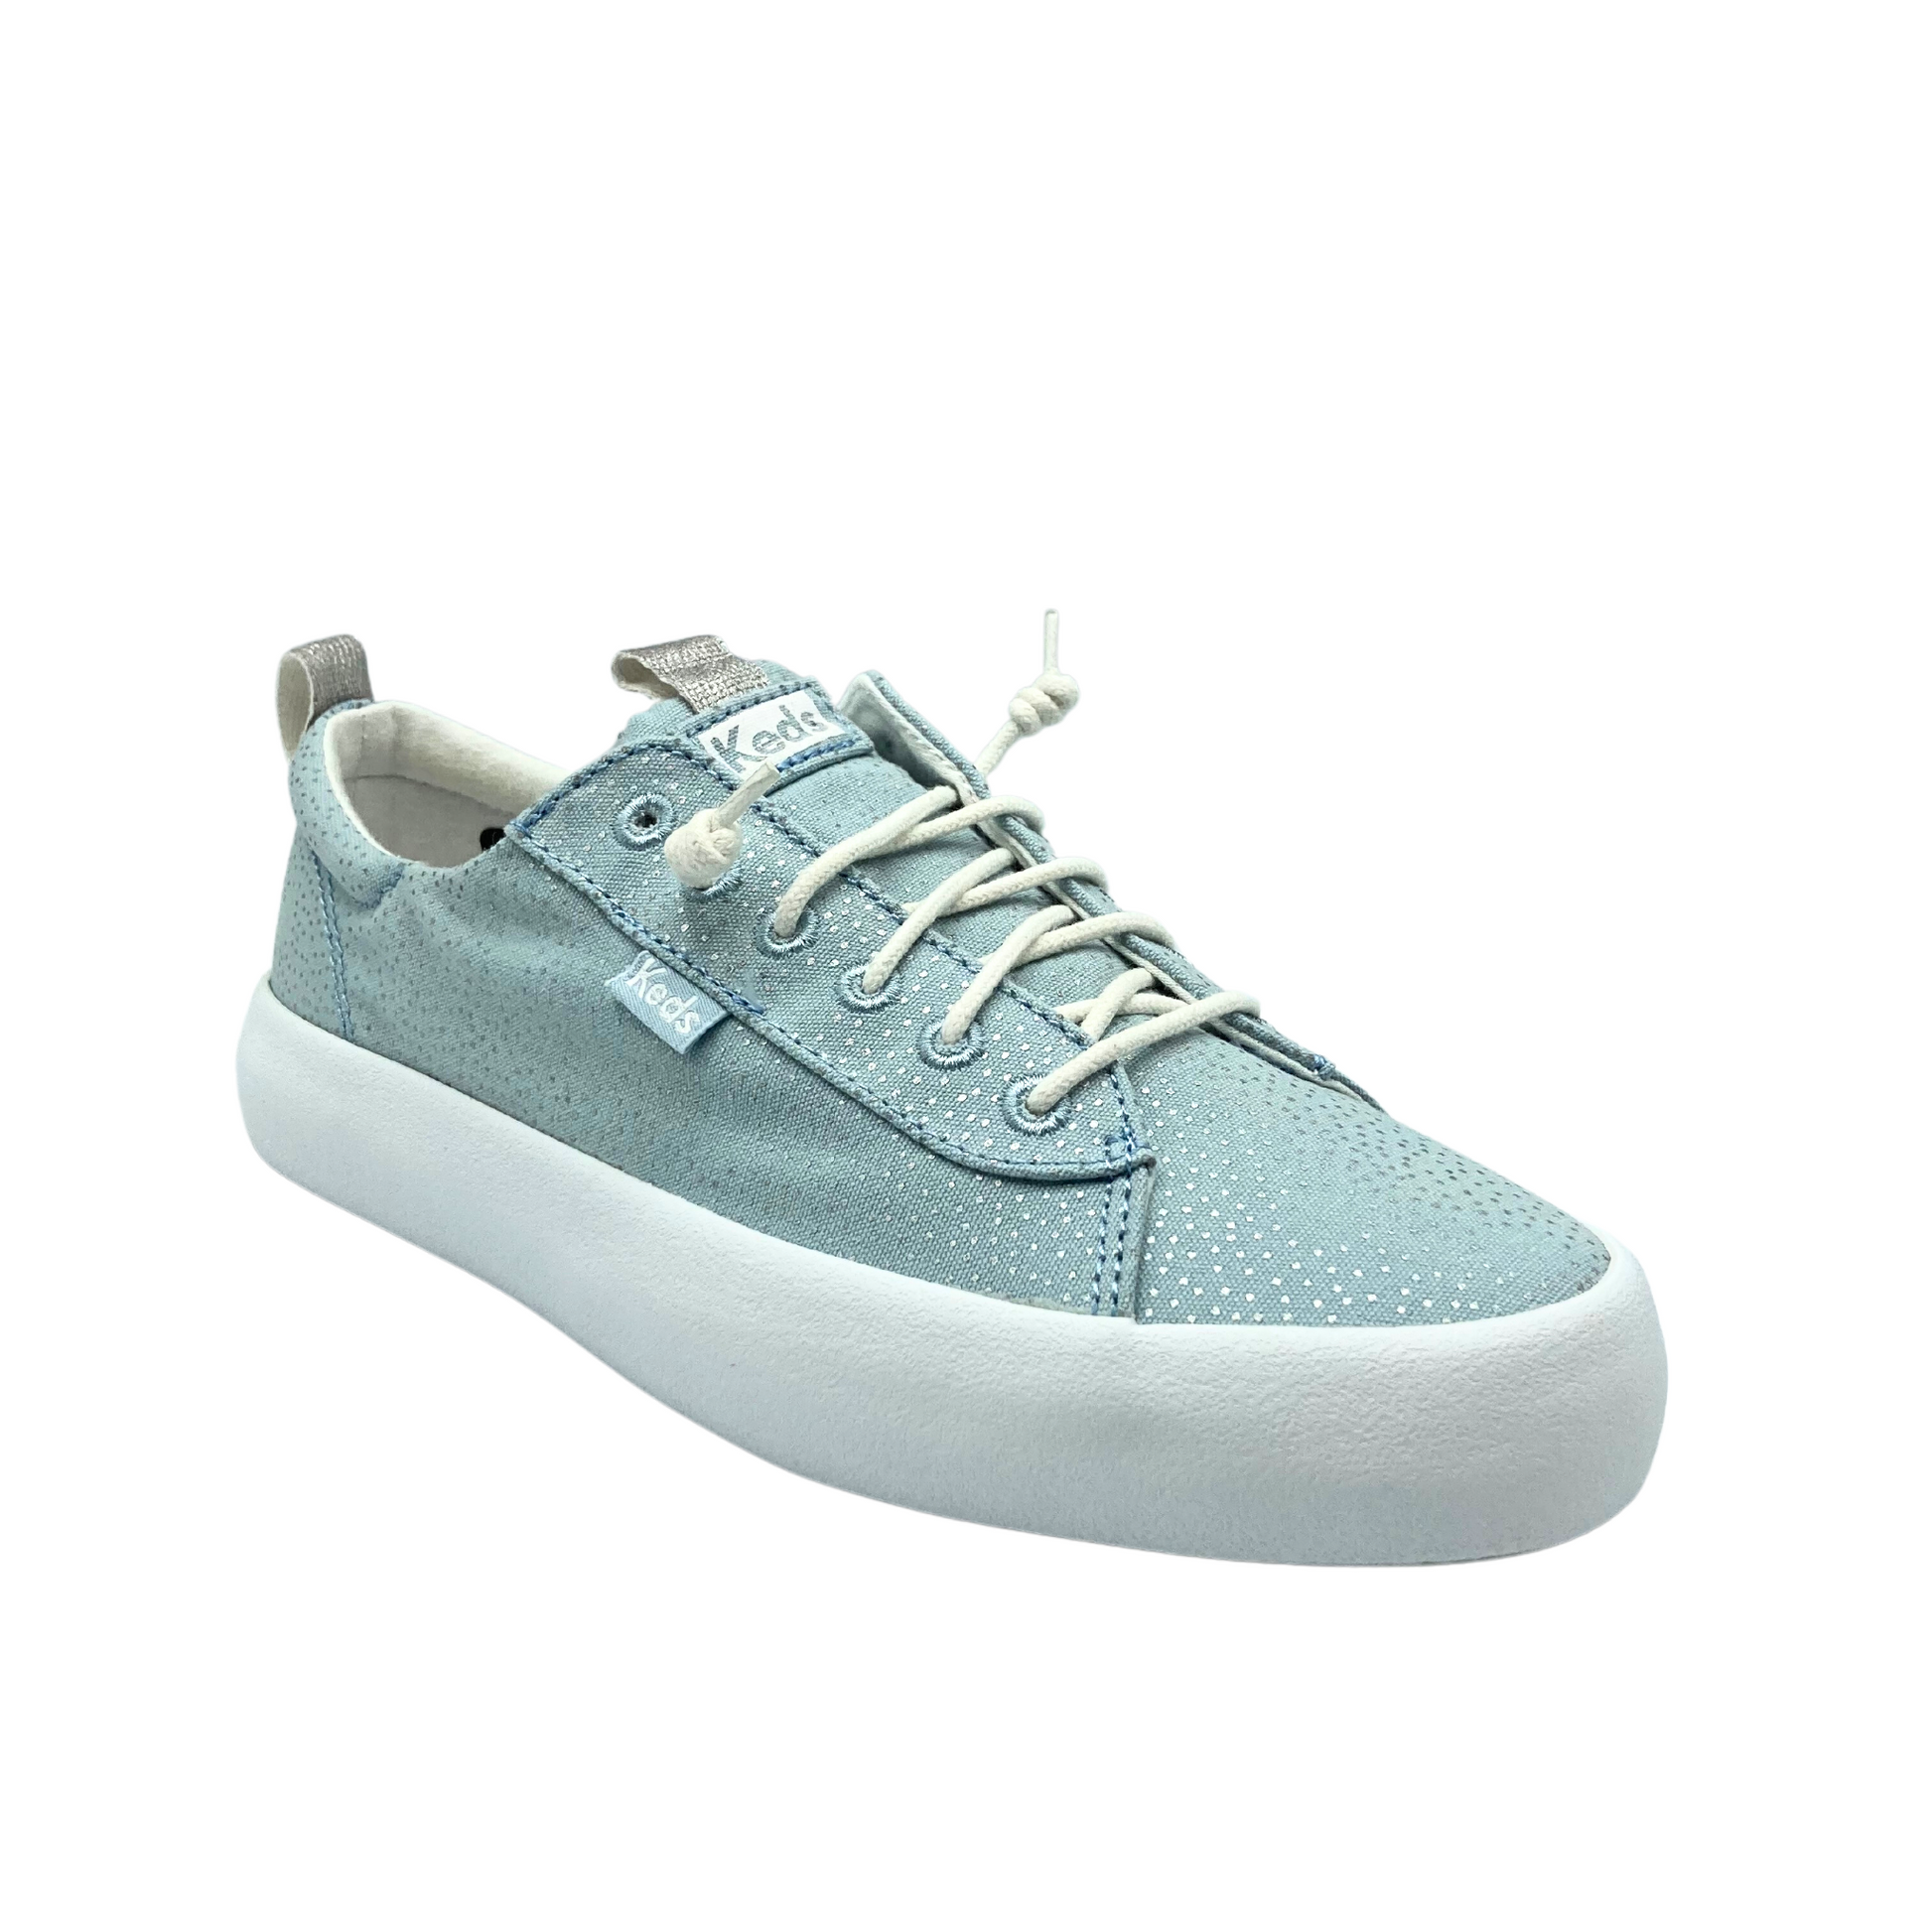 Angled front view of a canvas sneaker in a light blue/silver combo.   Elastic laces for slip on/off and white rubber outsole